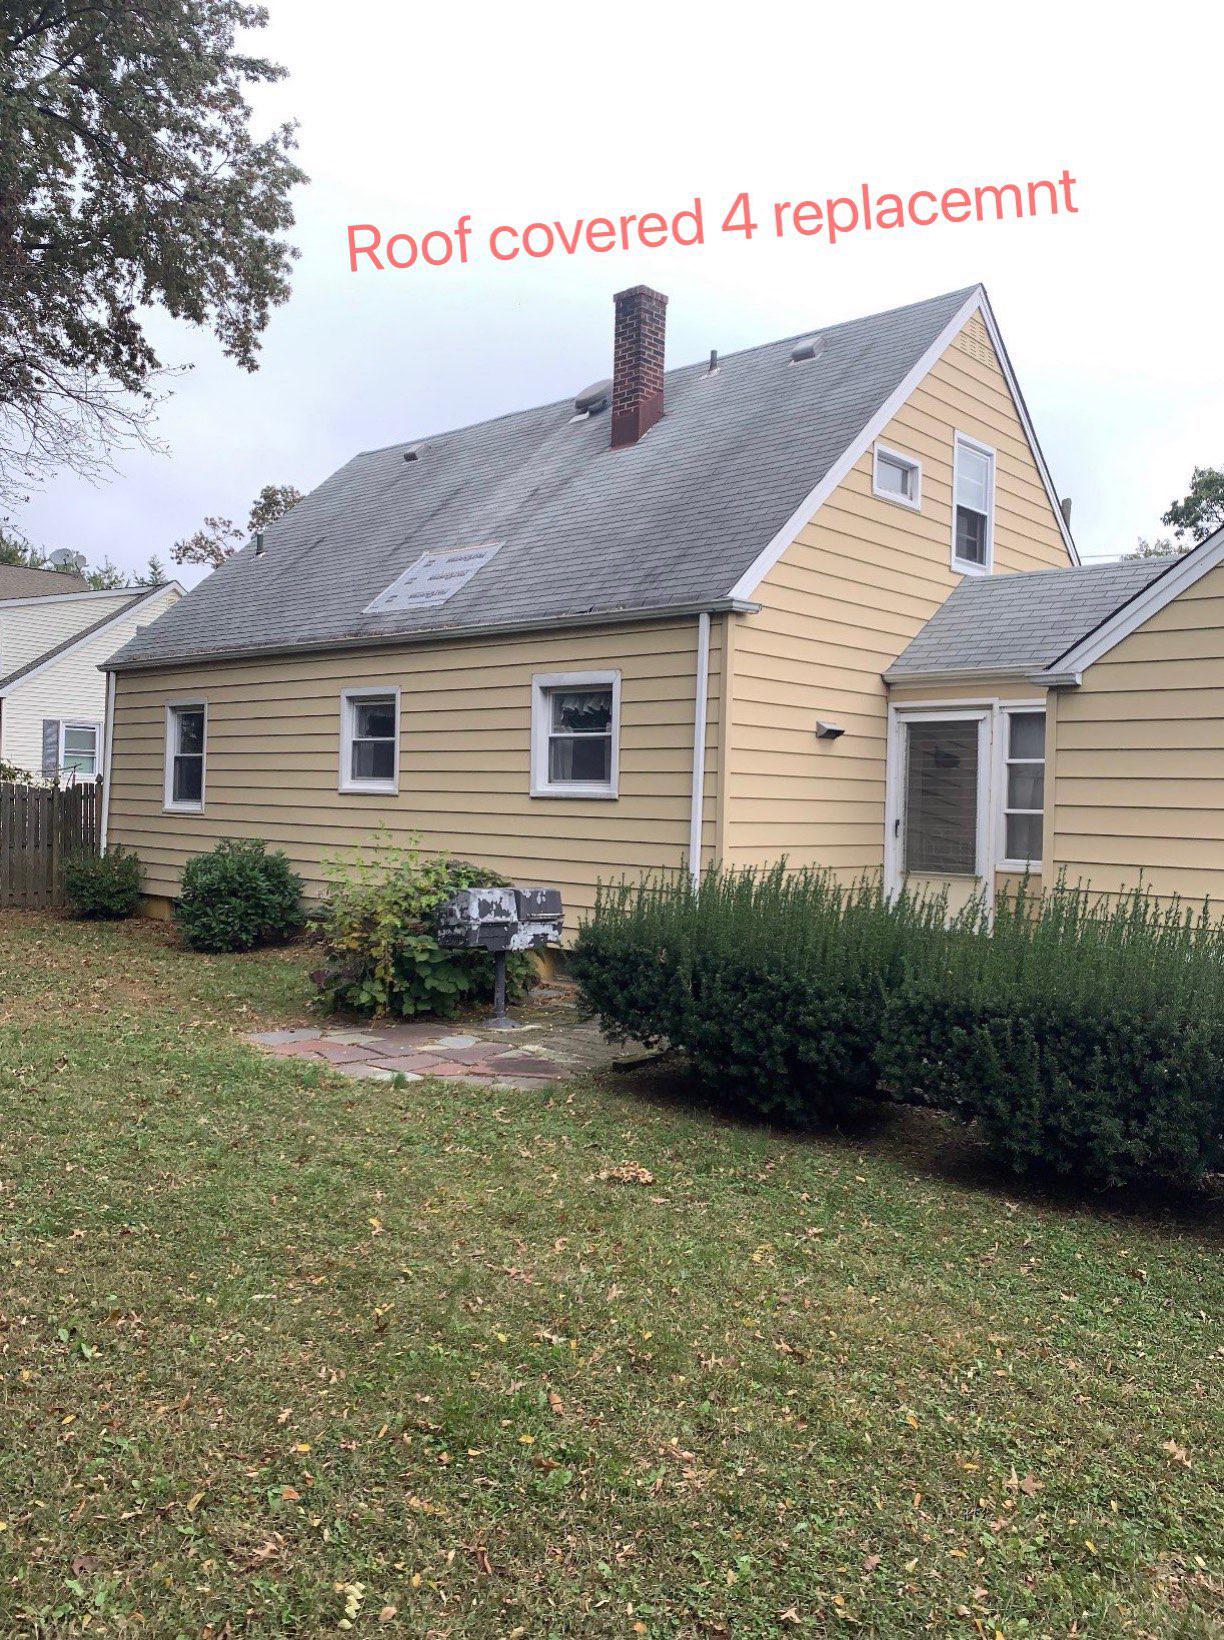 Xpert Adjusting - The Best Public Adjuster to handle roof claims. If you have a roof leak call Xpert Adjusting first!!